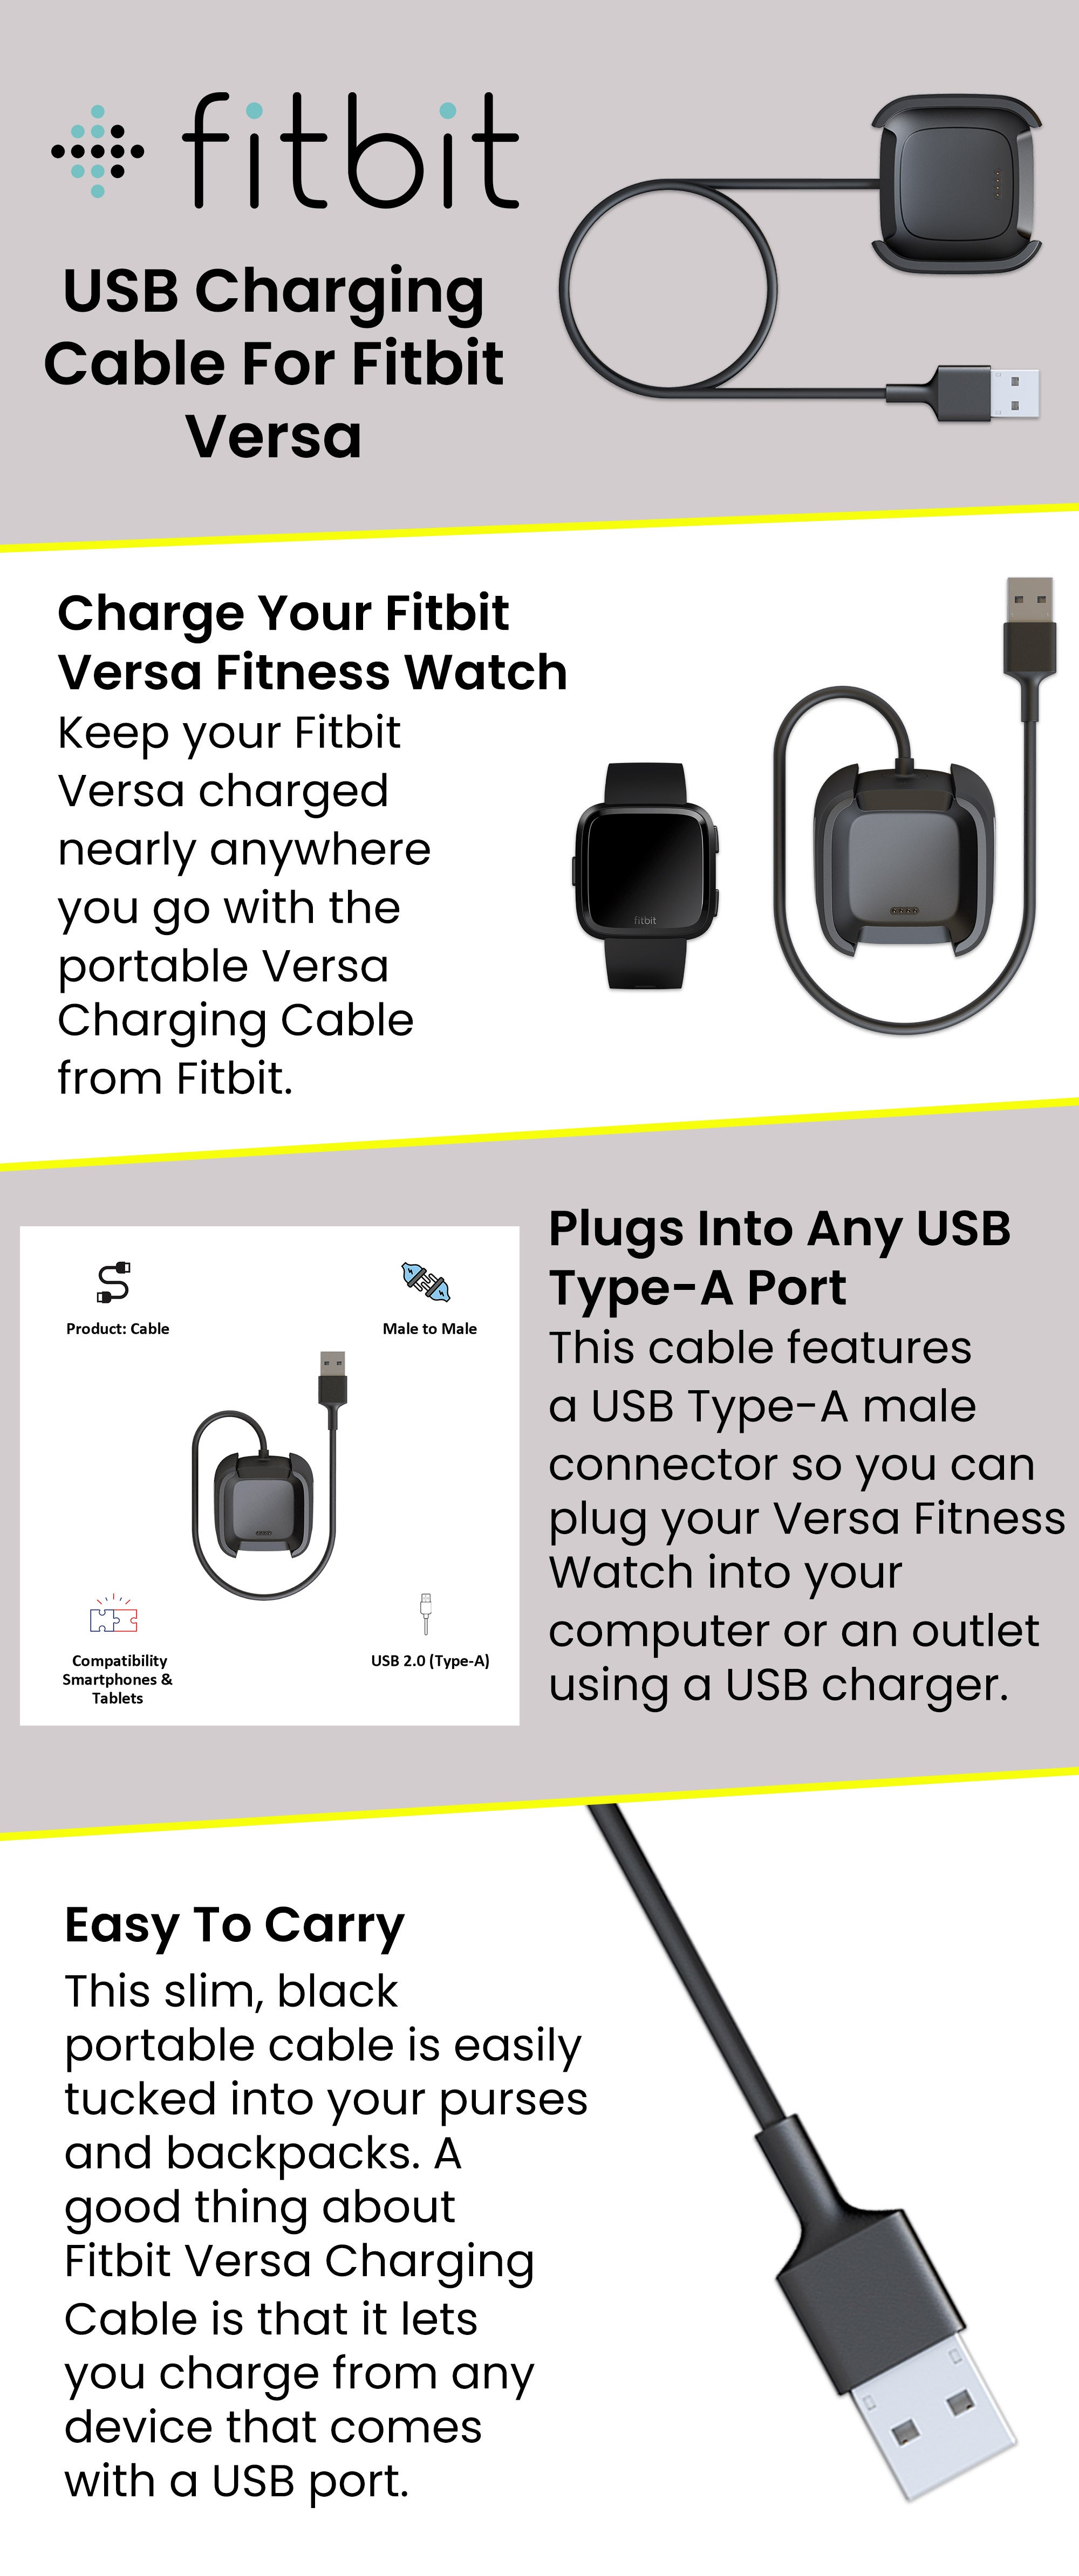 USB Charging Cable For Fitbit Versa 1.3meter Black/Silver